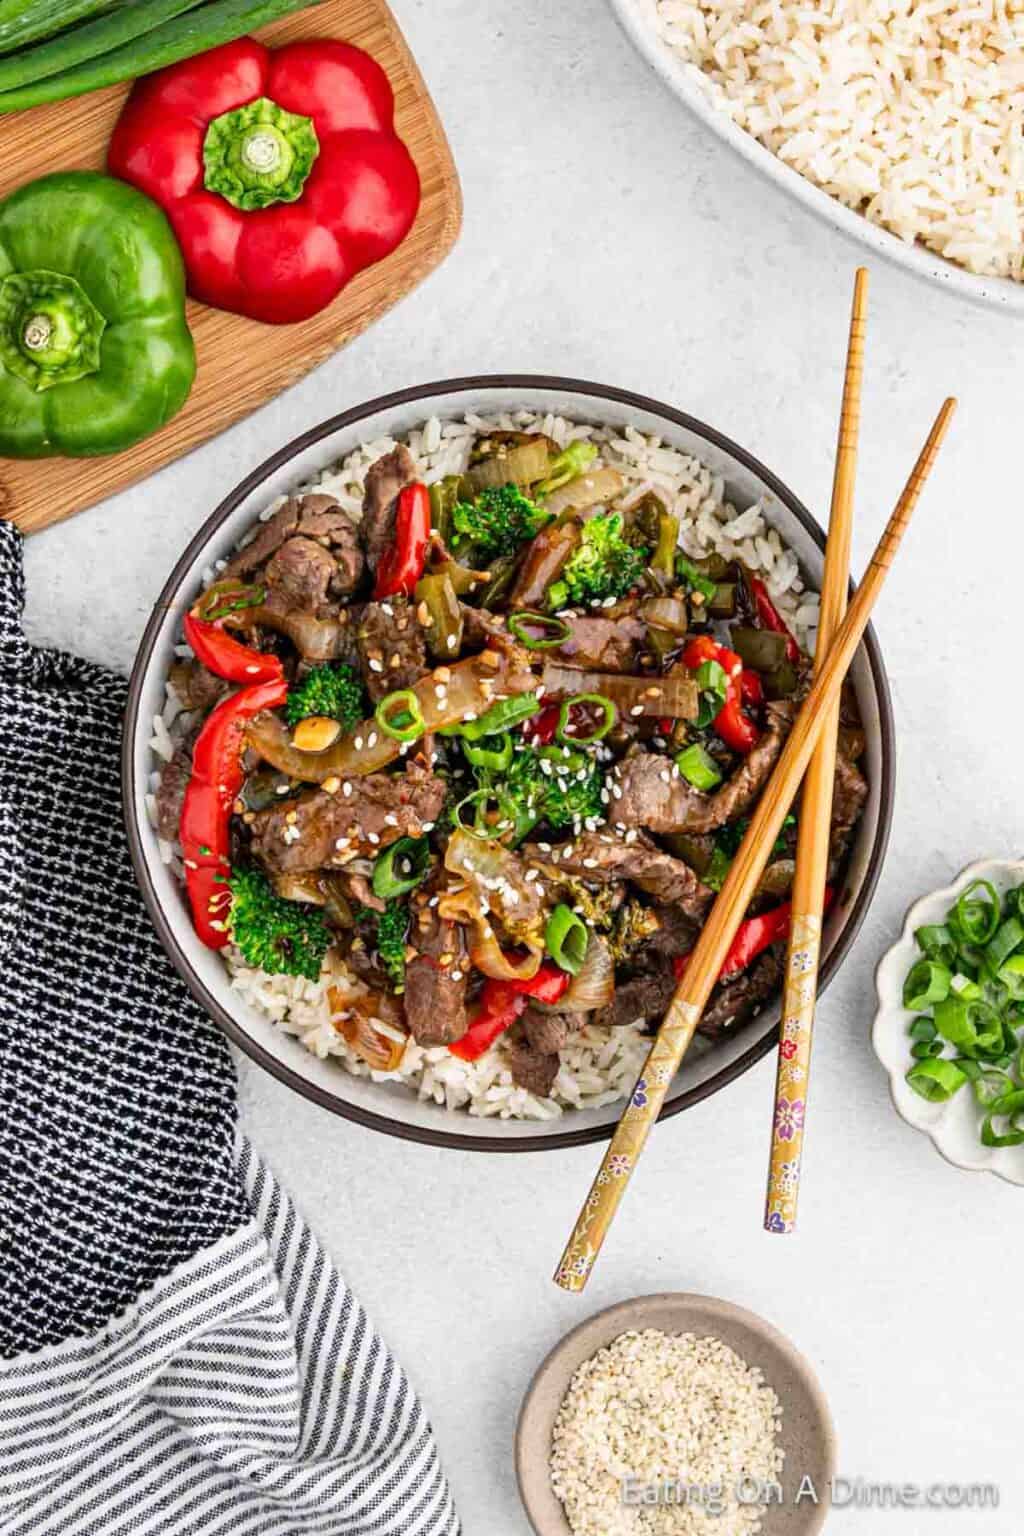 Instant Pot Beef Stir Fry - Eating on a Dime